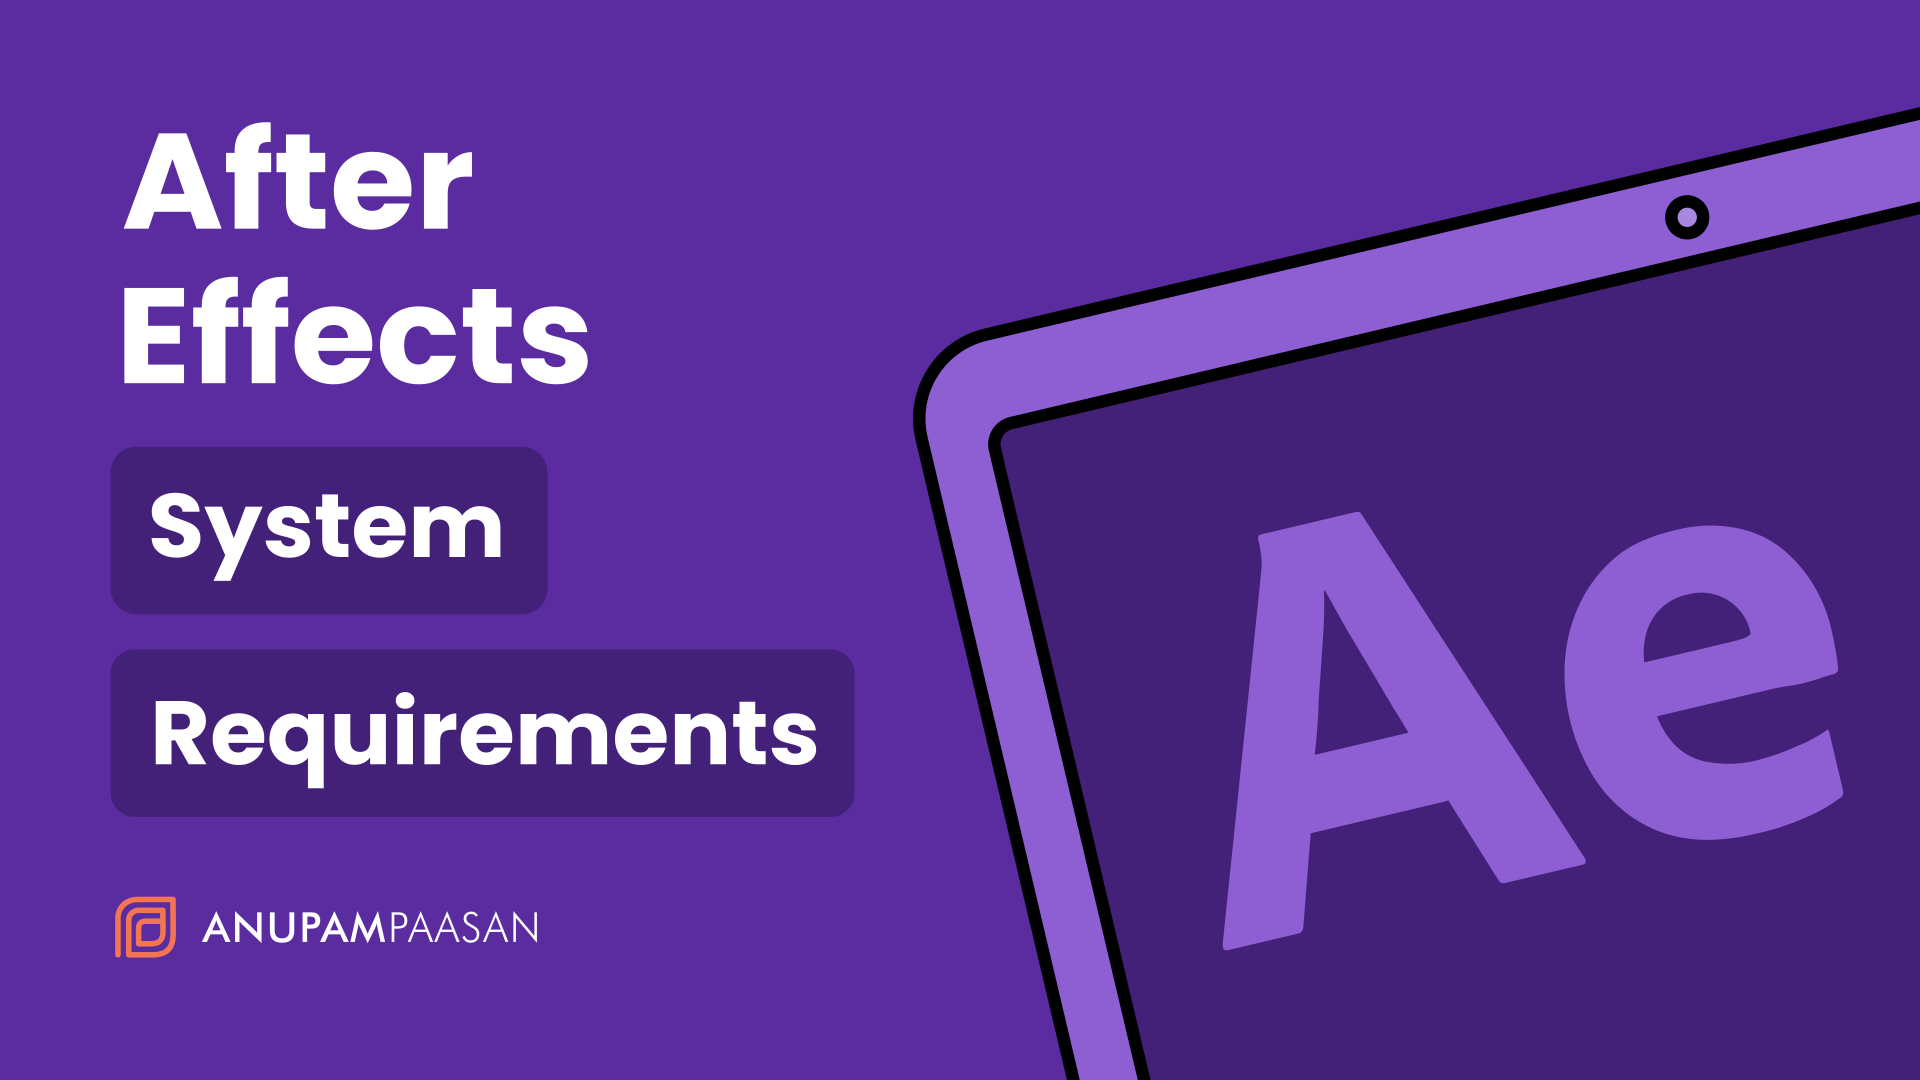 Adobe After Effects System Requirements - Featured Image - Anupam Paasan Digital